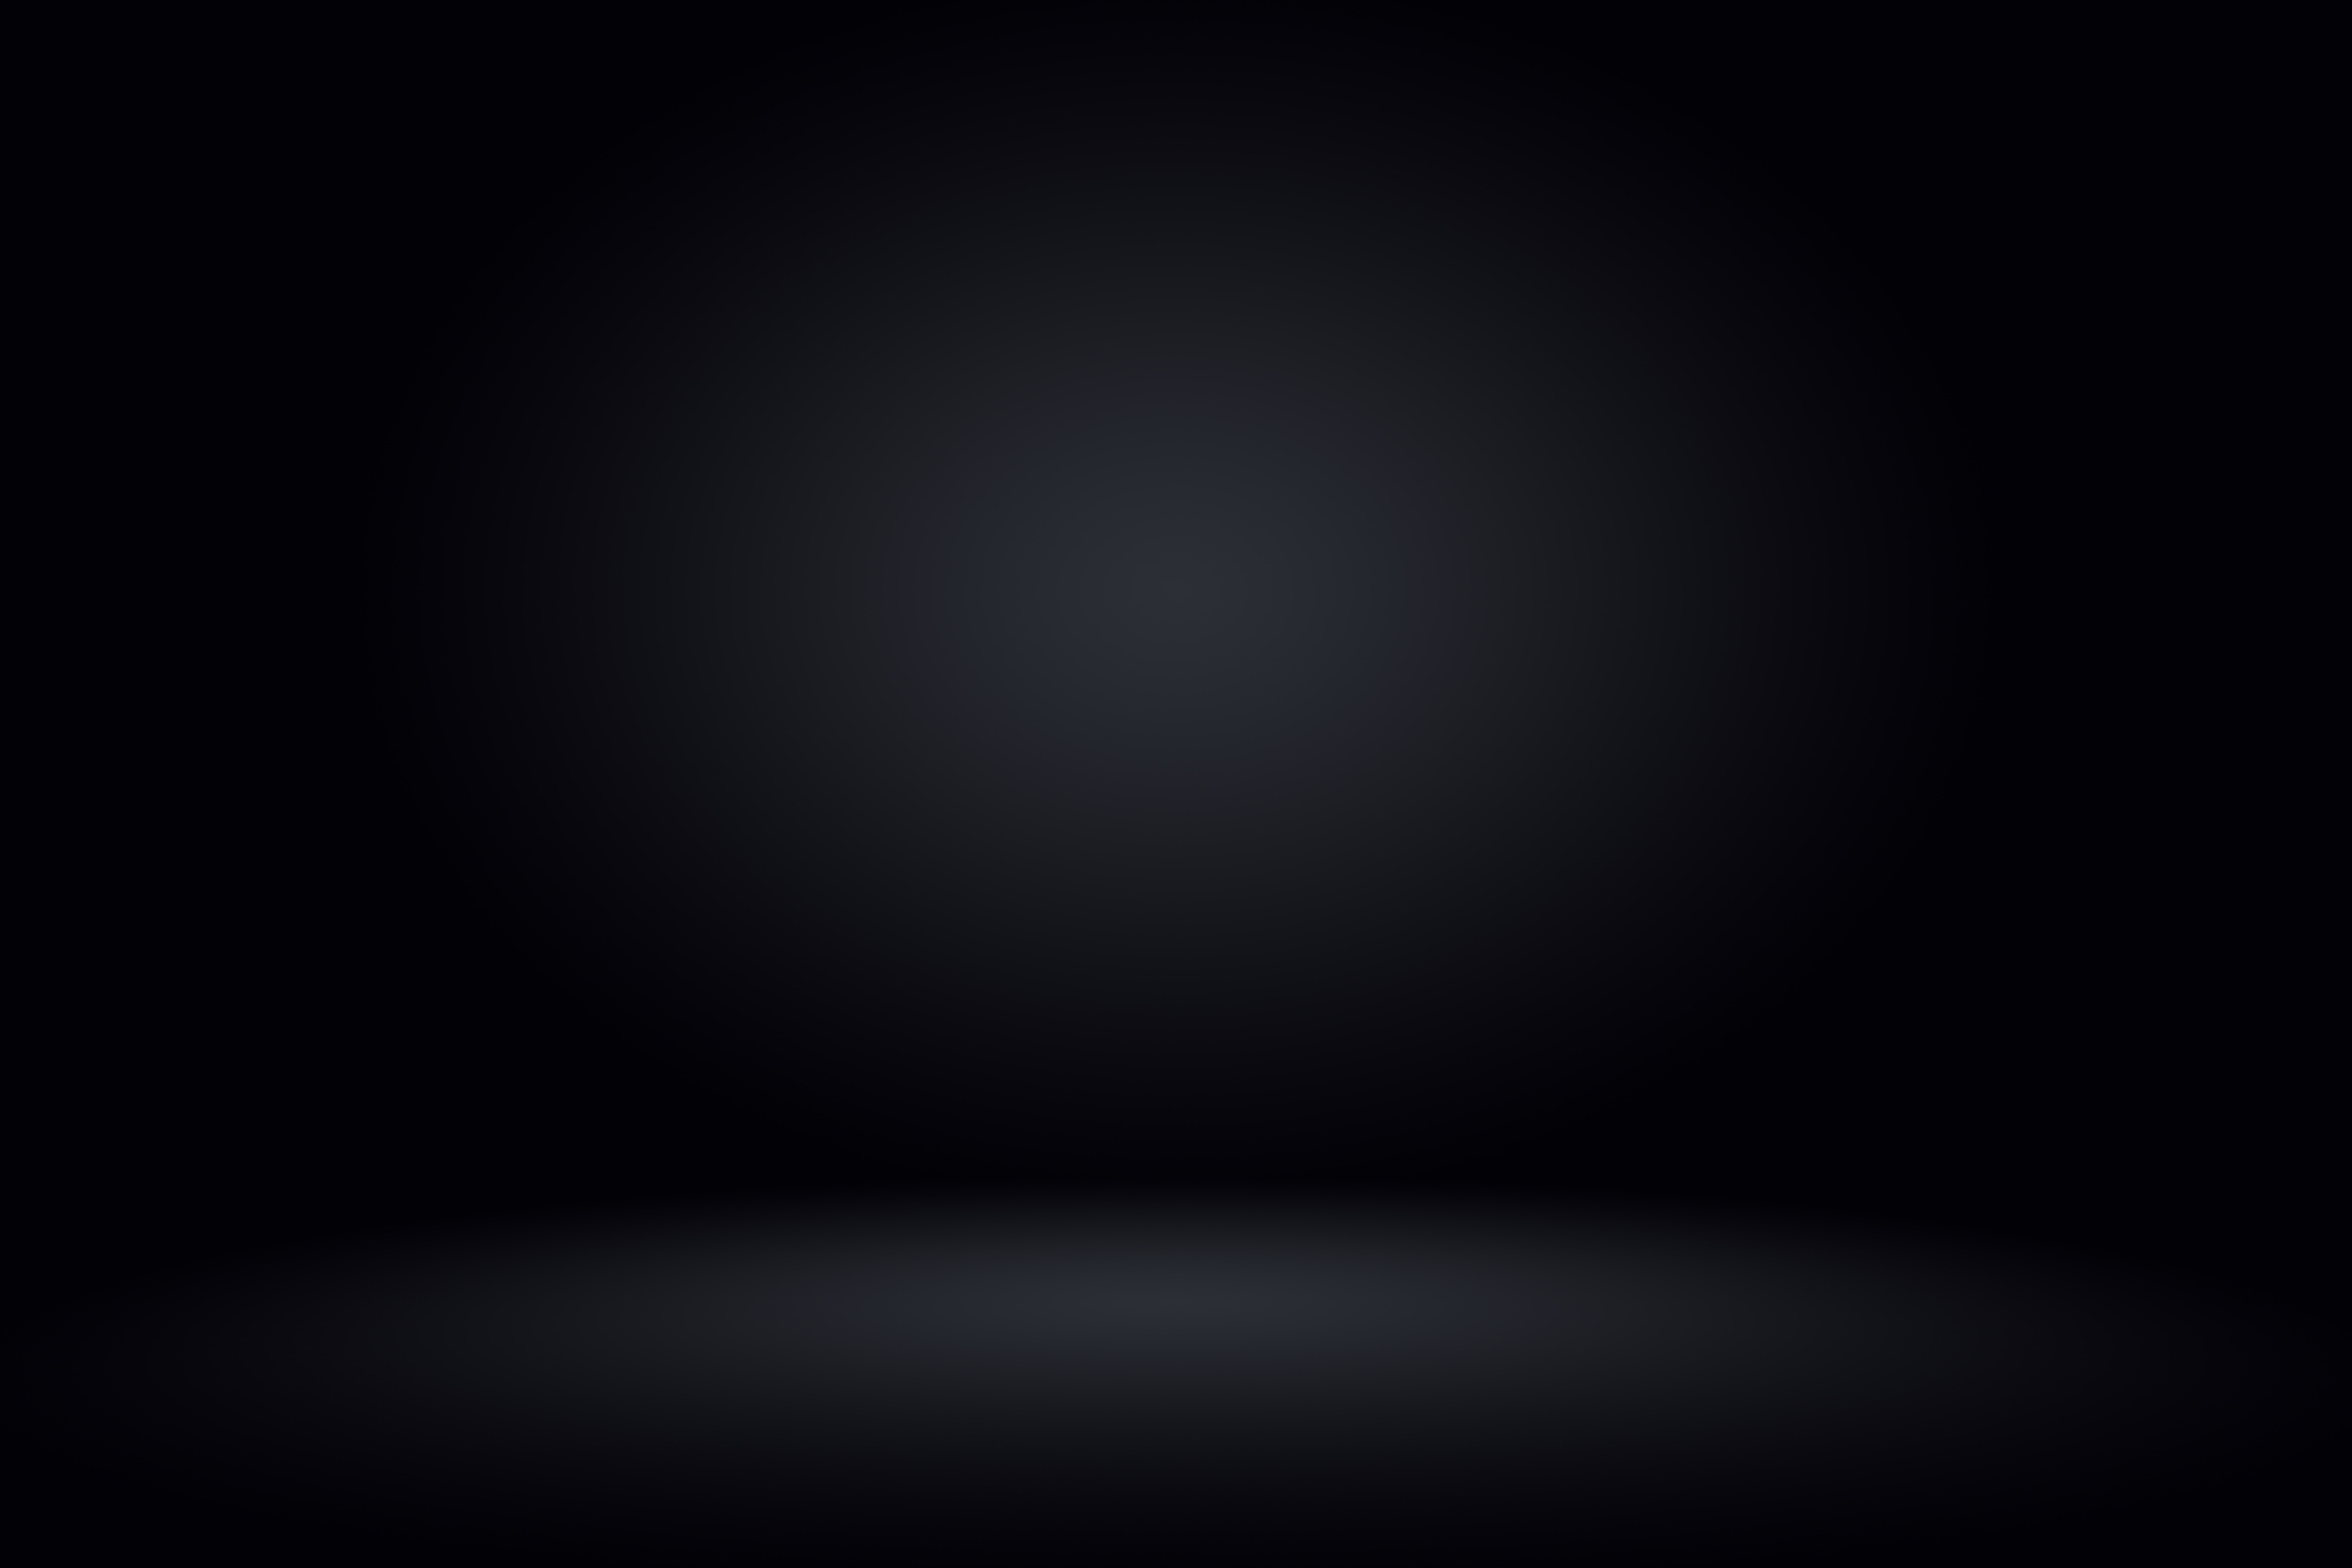 Abstract Dark Gray Template Blank Space Dark Gradient Wall.Dark Gray Empty Room Studio Gradient Used for Montage or Display Your Products.